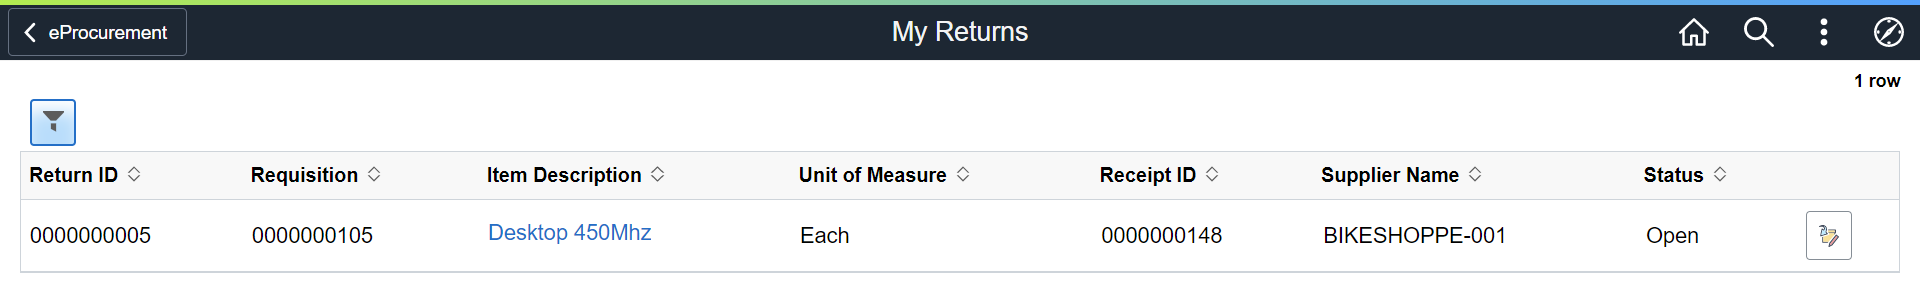 My Returns page